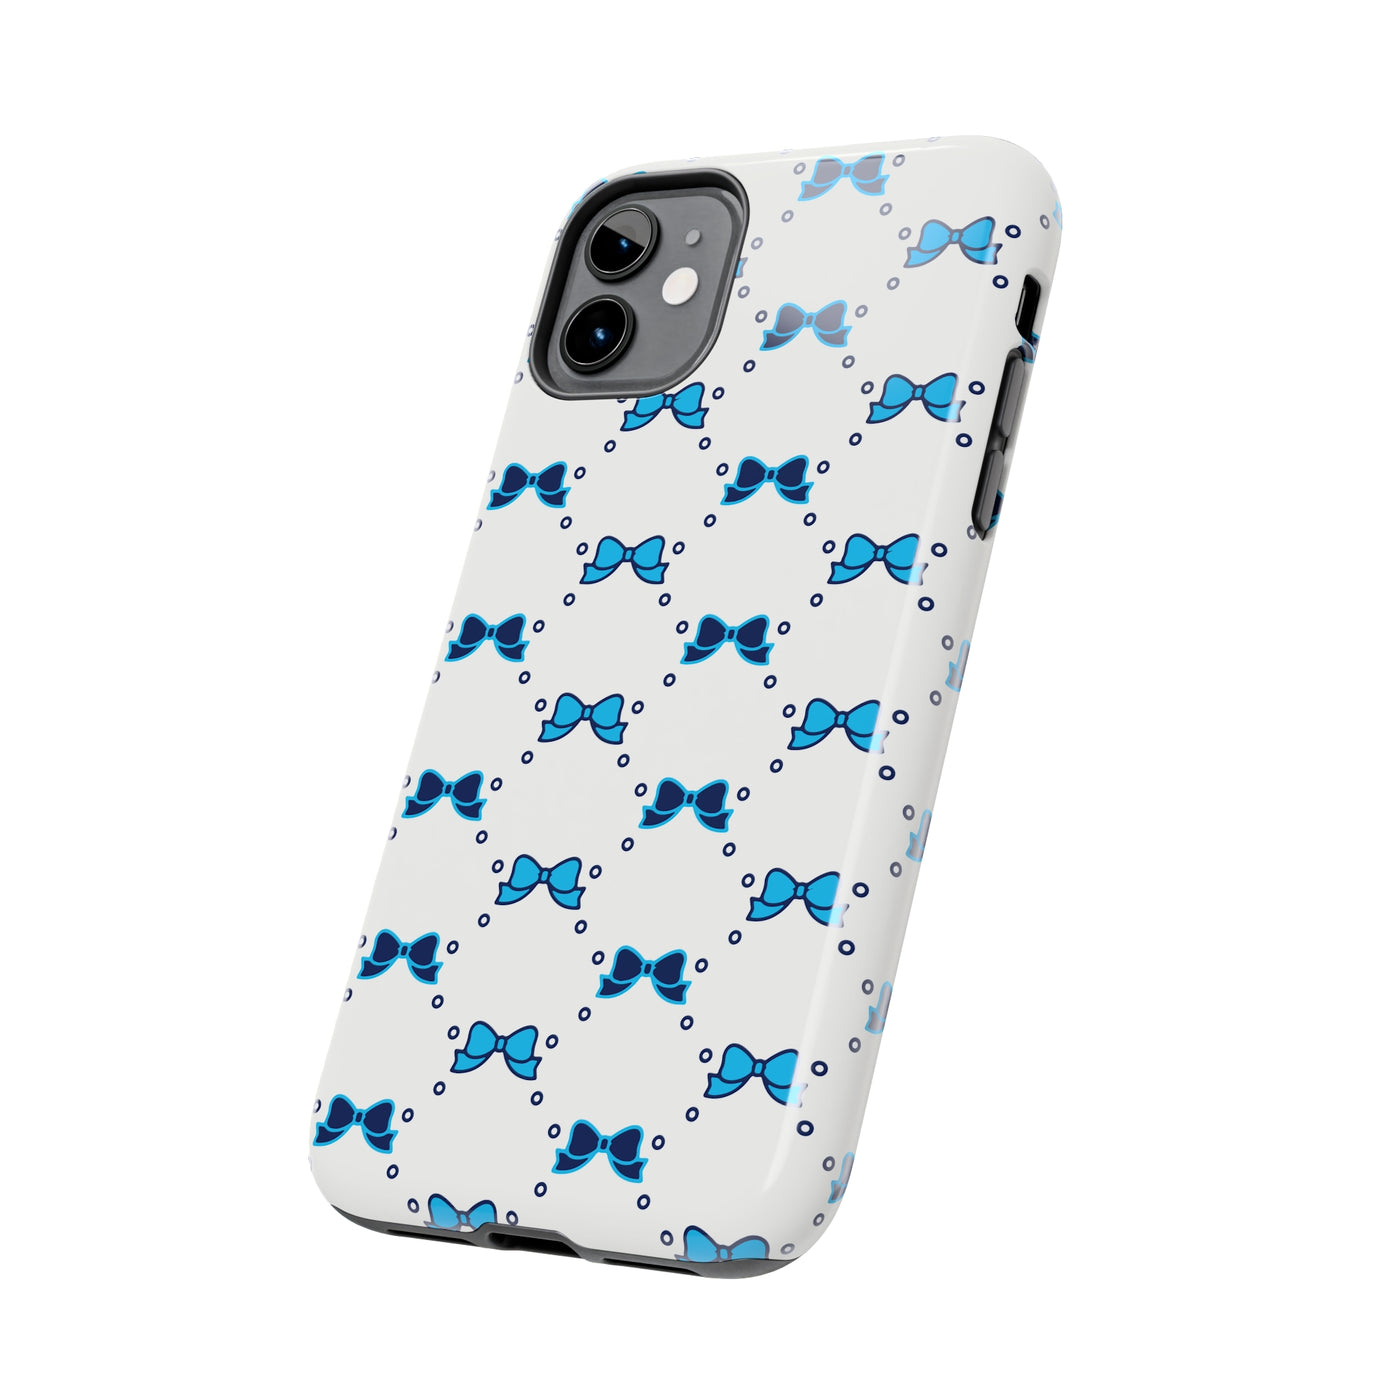 Pretty Little Bow Phone Case, Bed Party Bow Iphone case, Bow Phone Case, College Case, Bow Gift - Bow Aesthetic, Villanova, PSU, Blue Bow